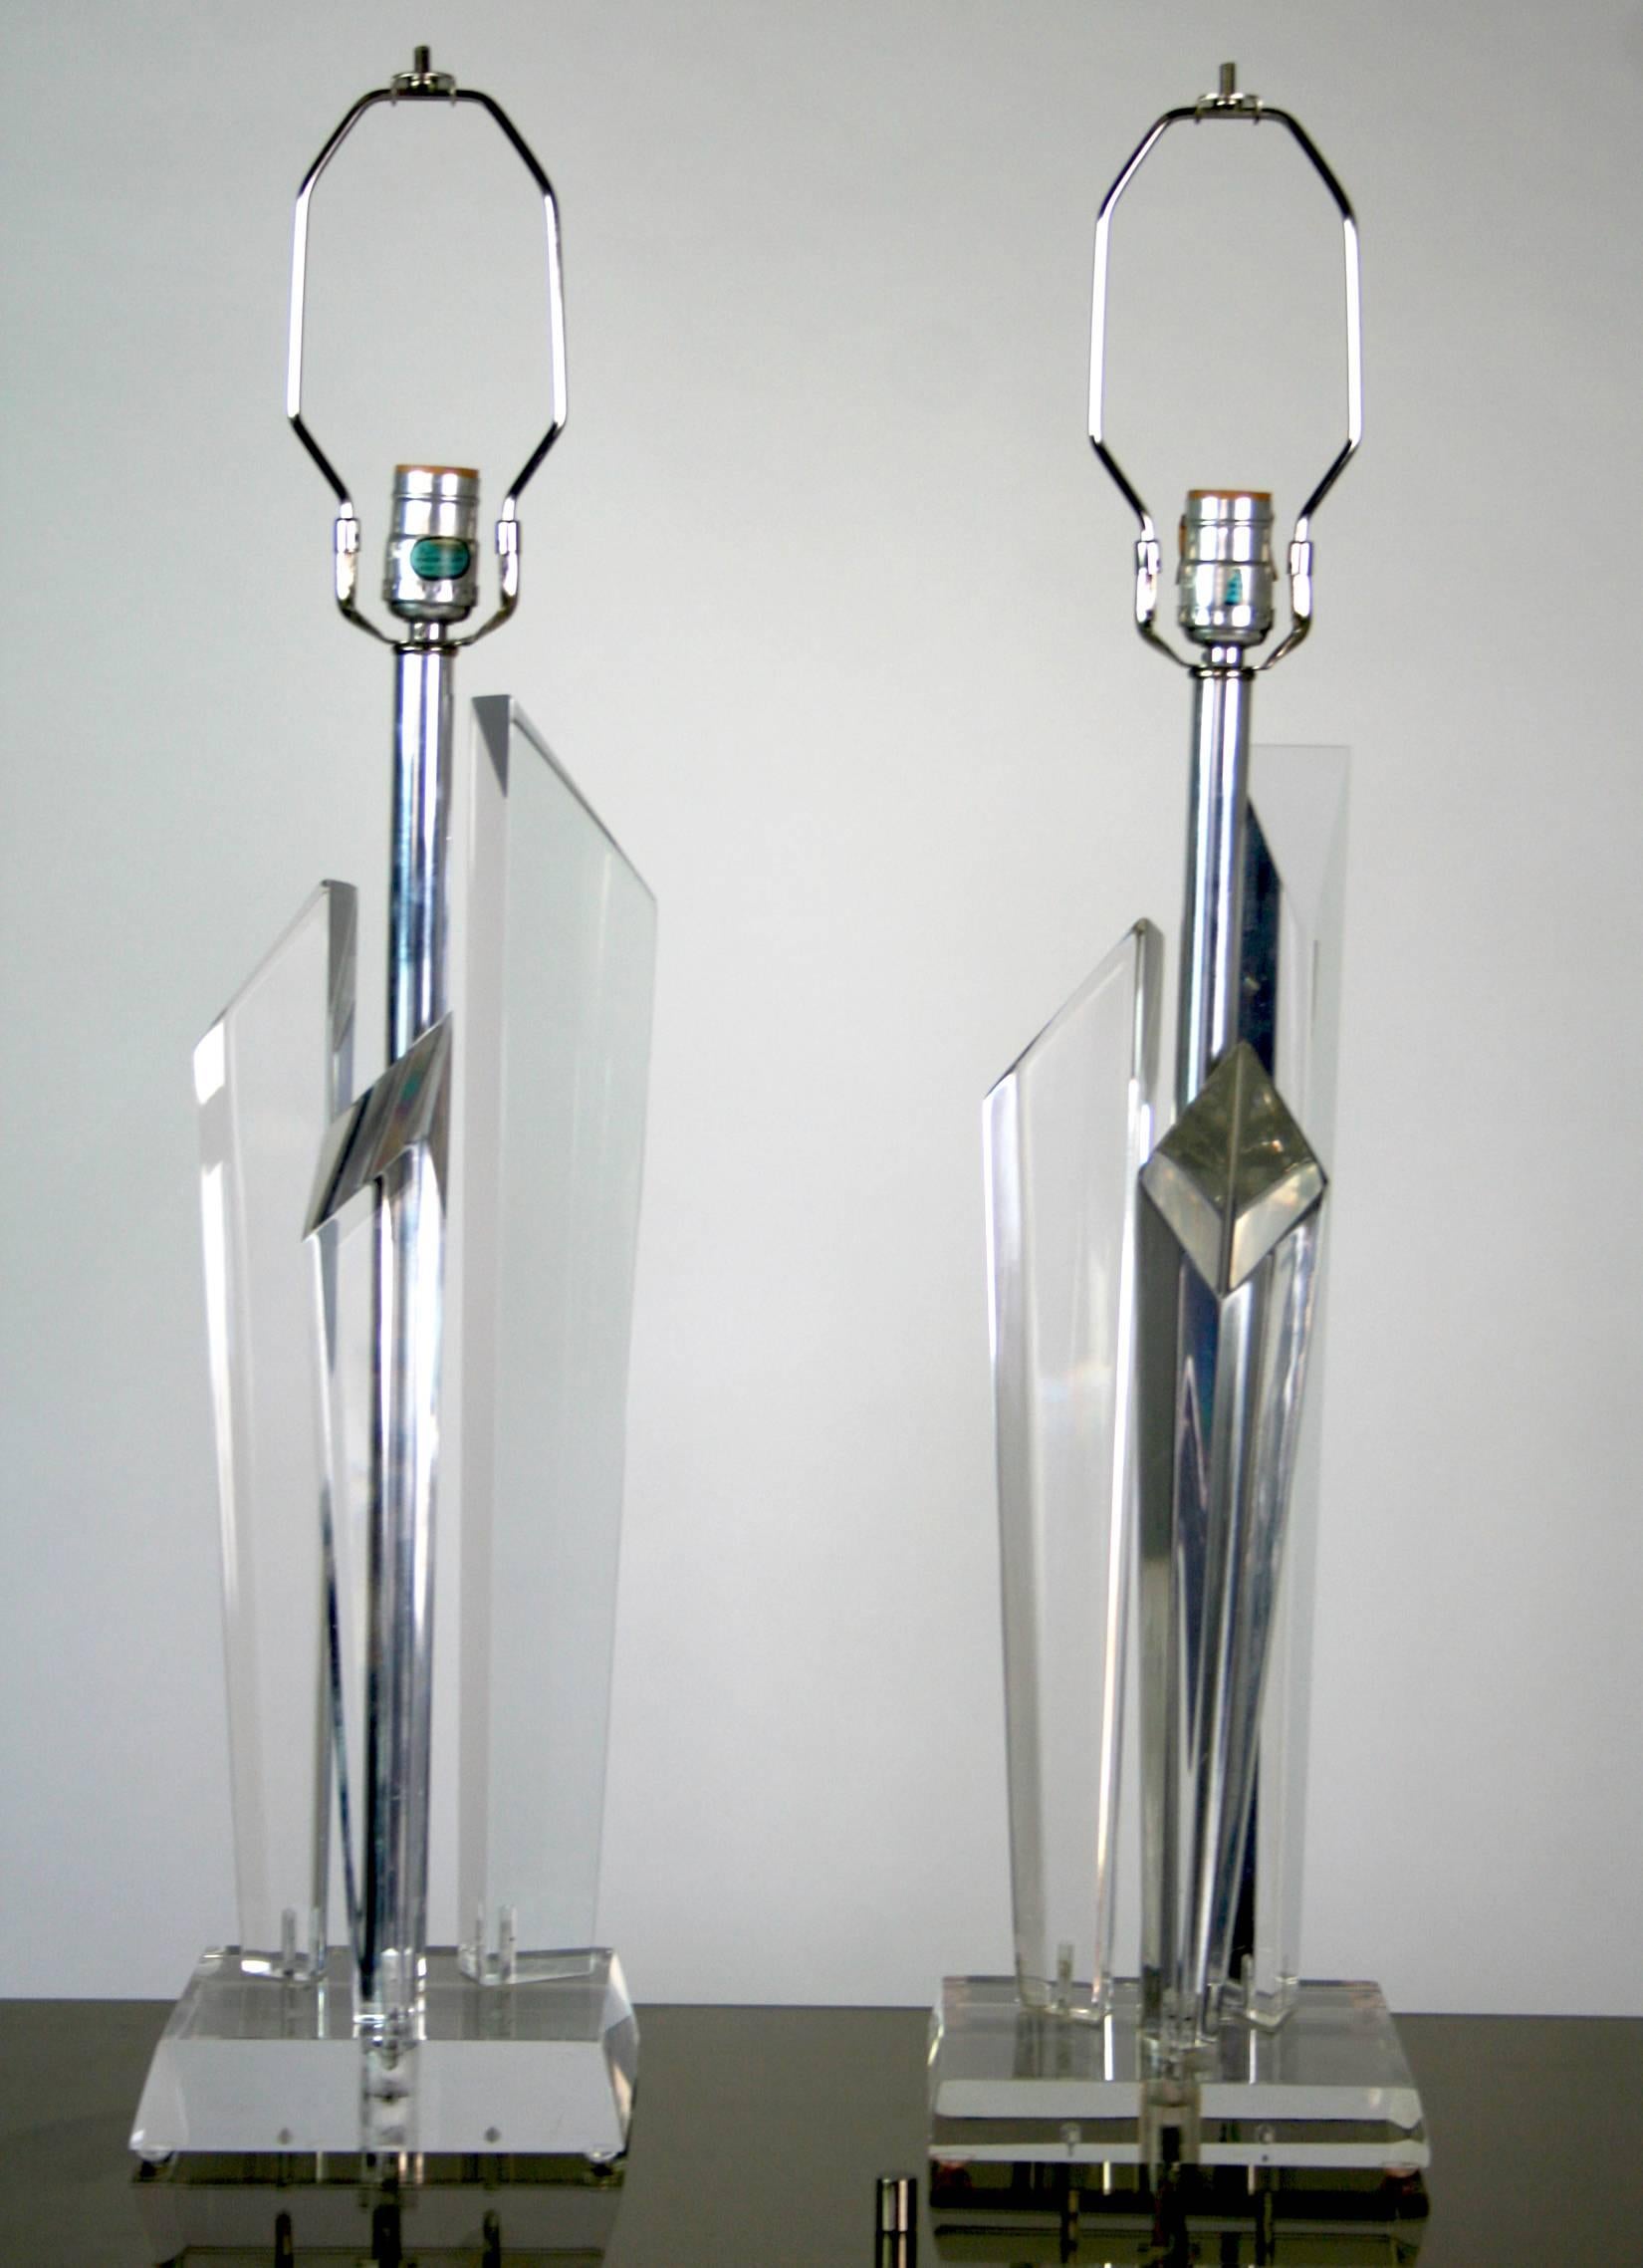 A pair of Lucite lamps each with three Lucite tapered prisms with angled tops on a Lucite base. The assemblage reflects and refracts light. Central chrome rod supports a socket and harp.